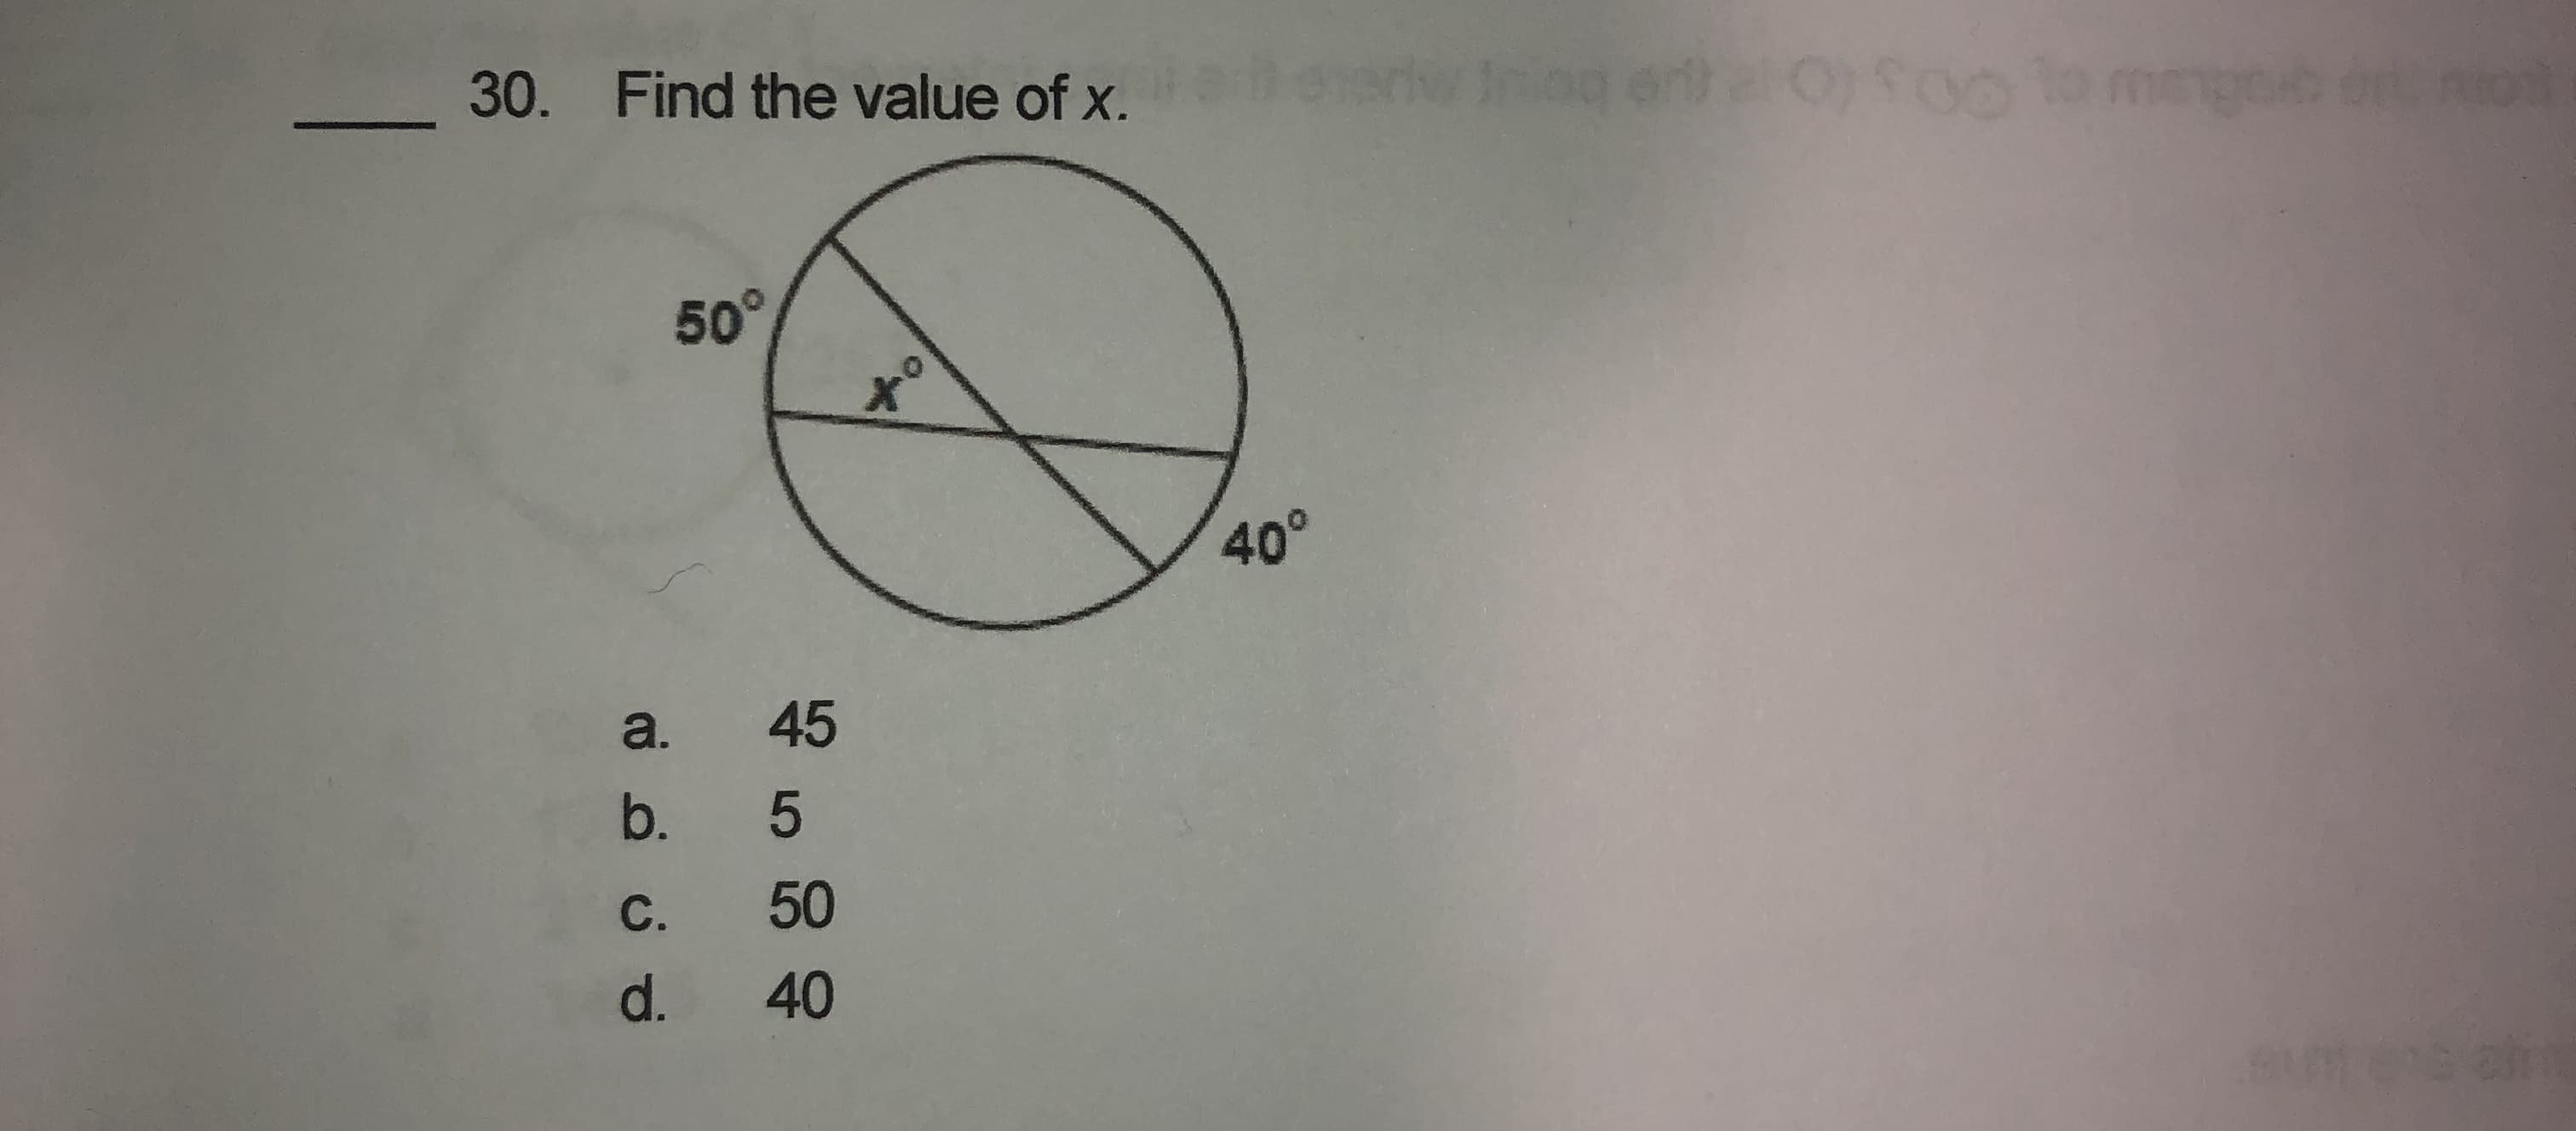 30. Find the value of x.
50°
of
40°
a. 45
b. 5
С.
50
d.
40
